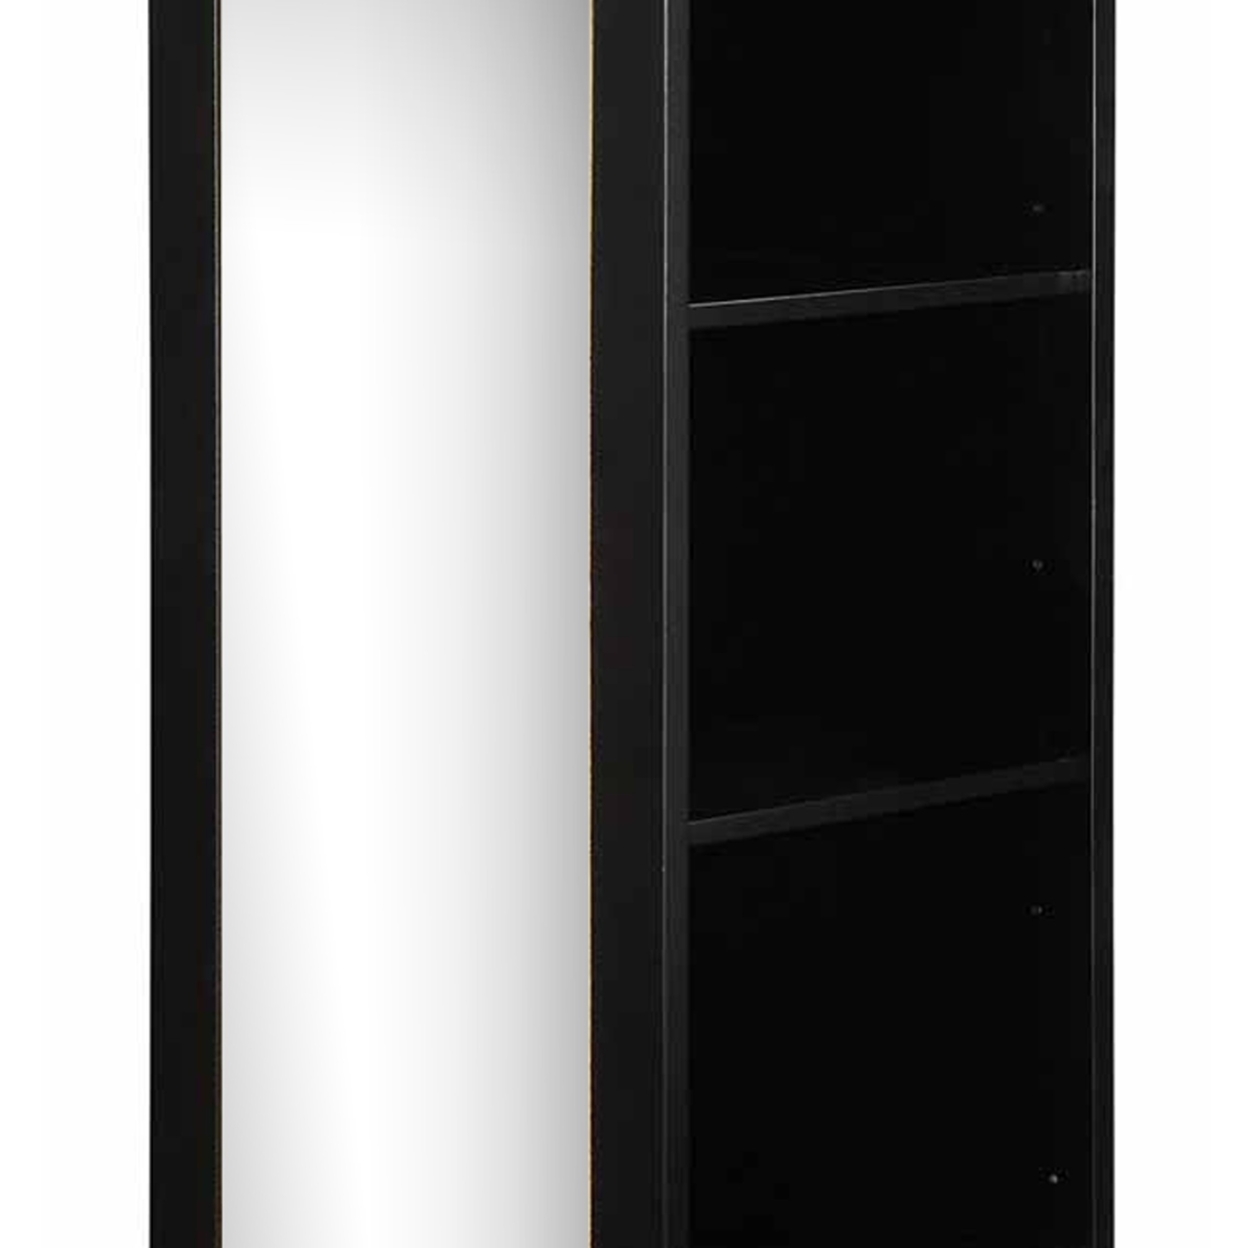 Traditional Style Wooden Accent Cabinet, Black- Saltoro Sherpi